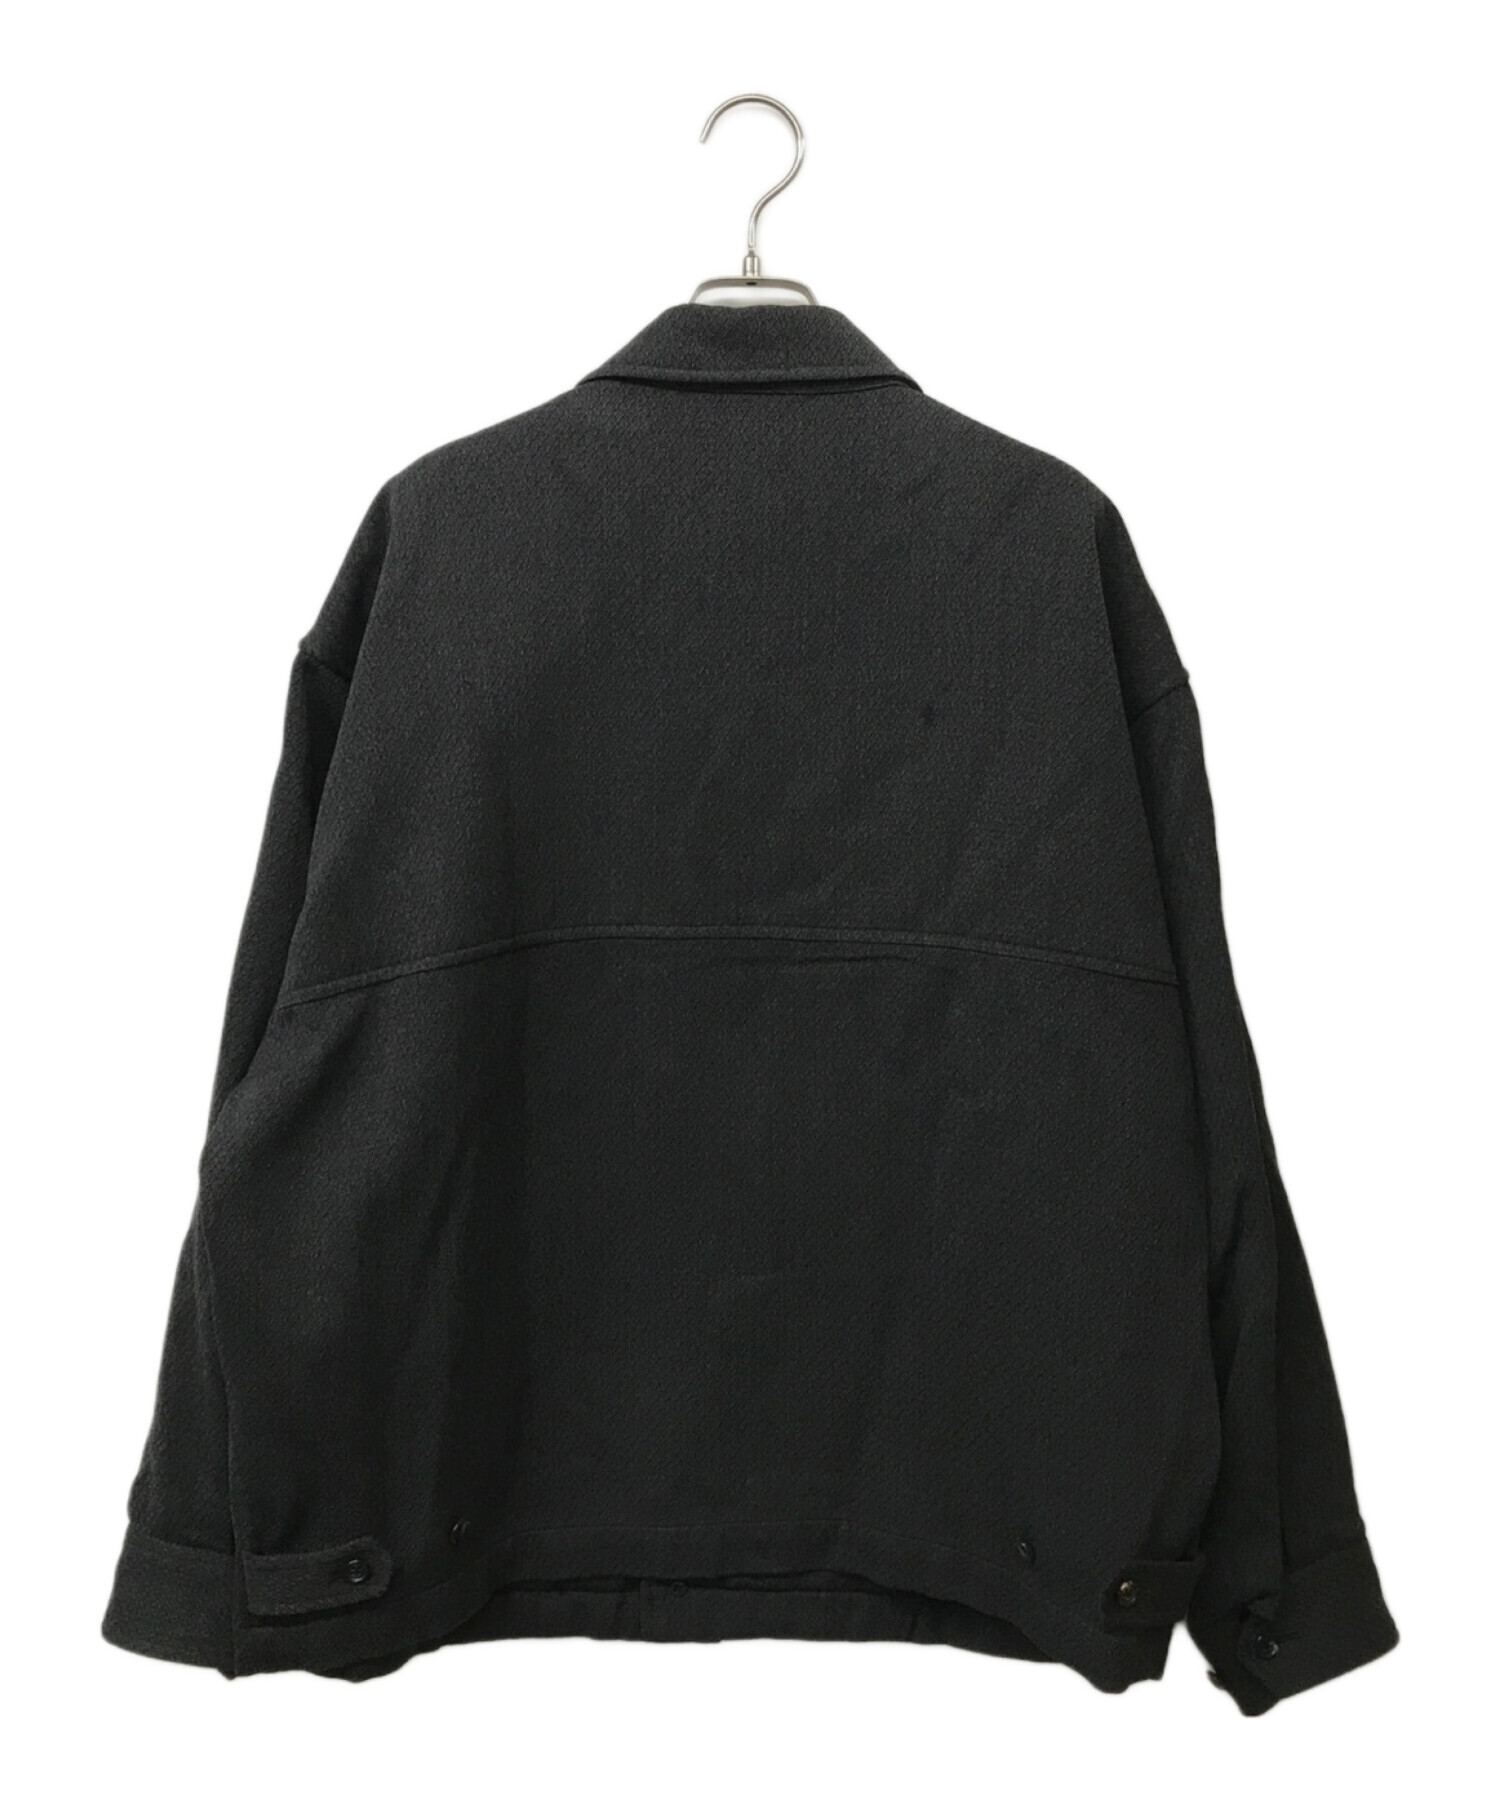 COMME des GARCONS HOMME (コムデギャルソン オム) COMME des GARCONS HOMME ヴィンテージウールブルゾン  グレー サイズ:M